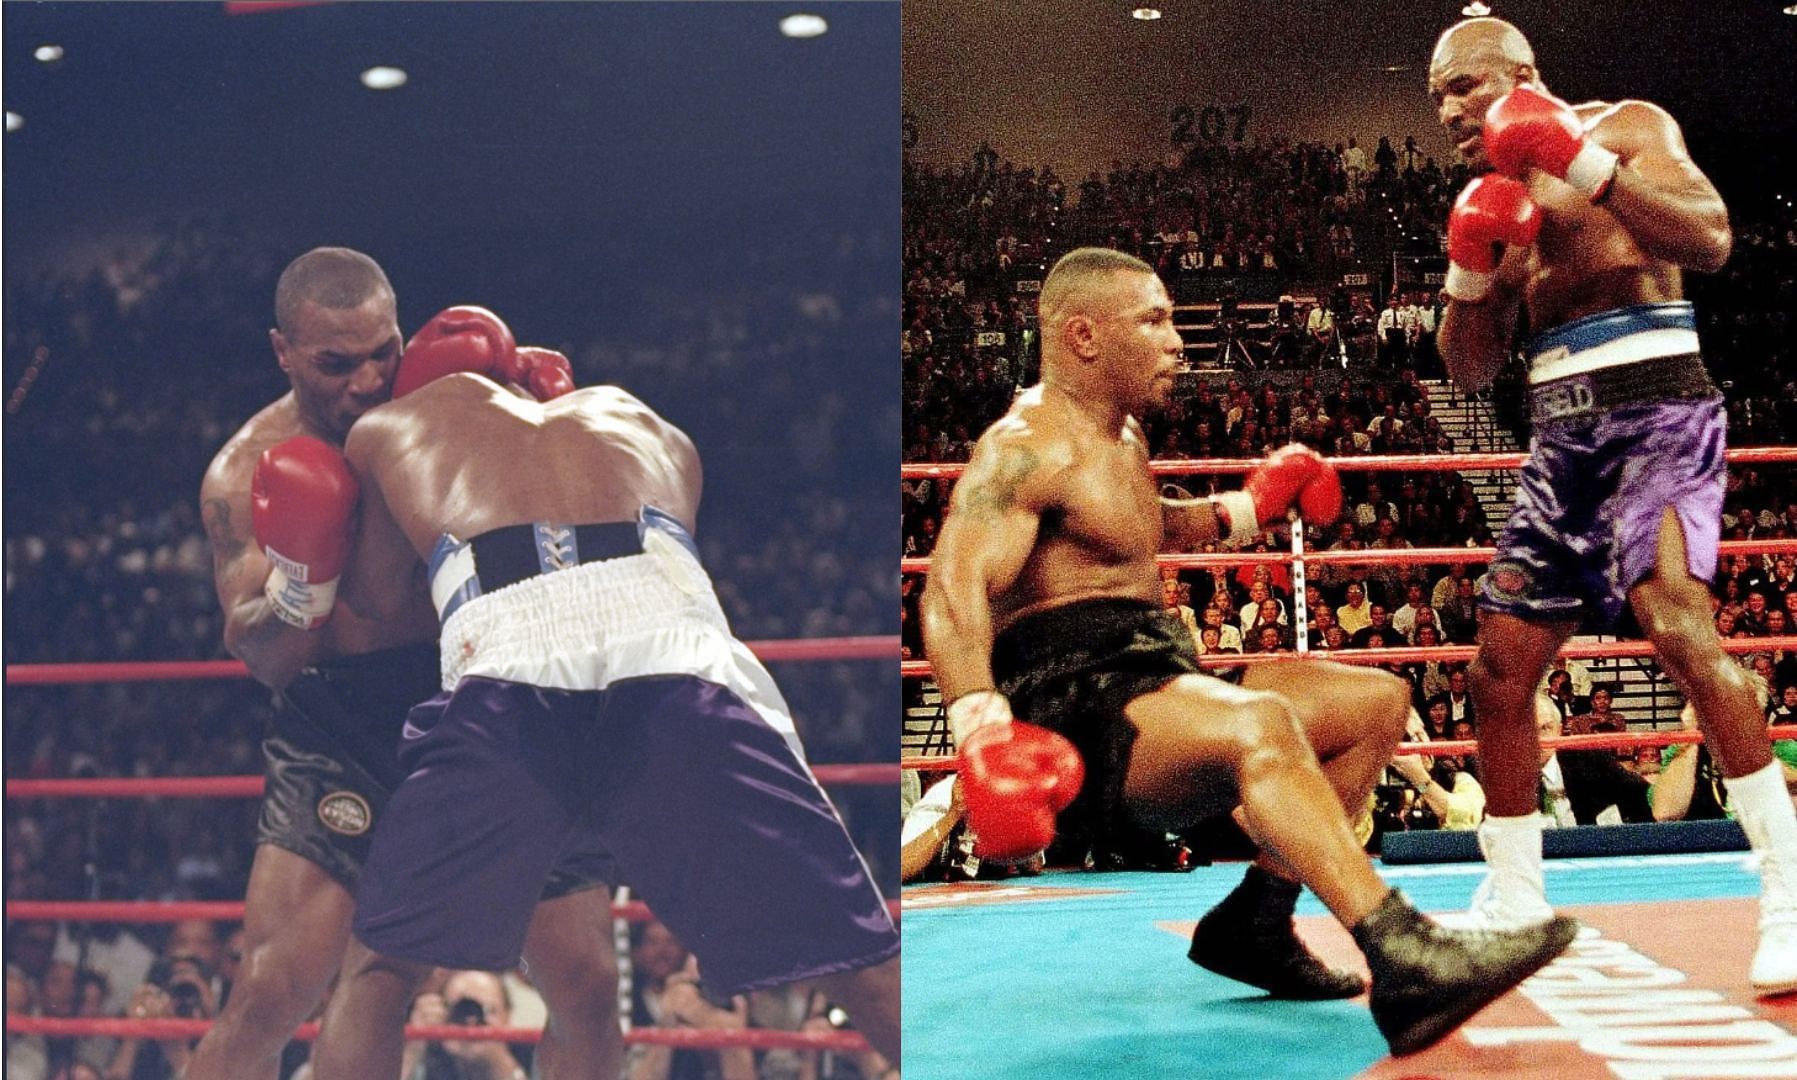 How many losses does Mike Tyson have in his boxing career?